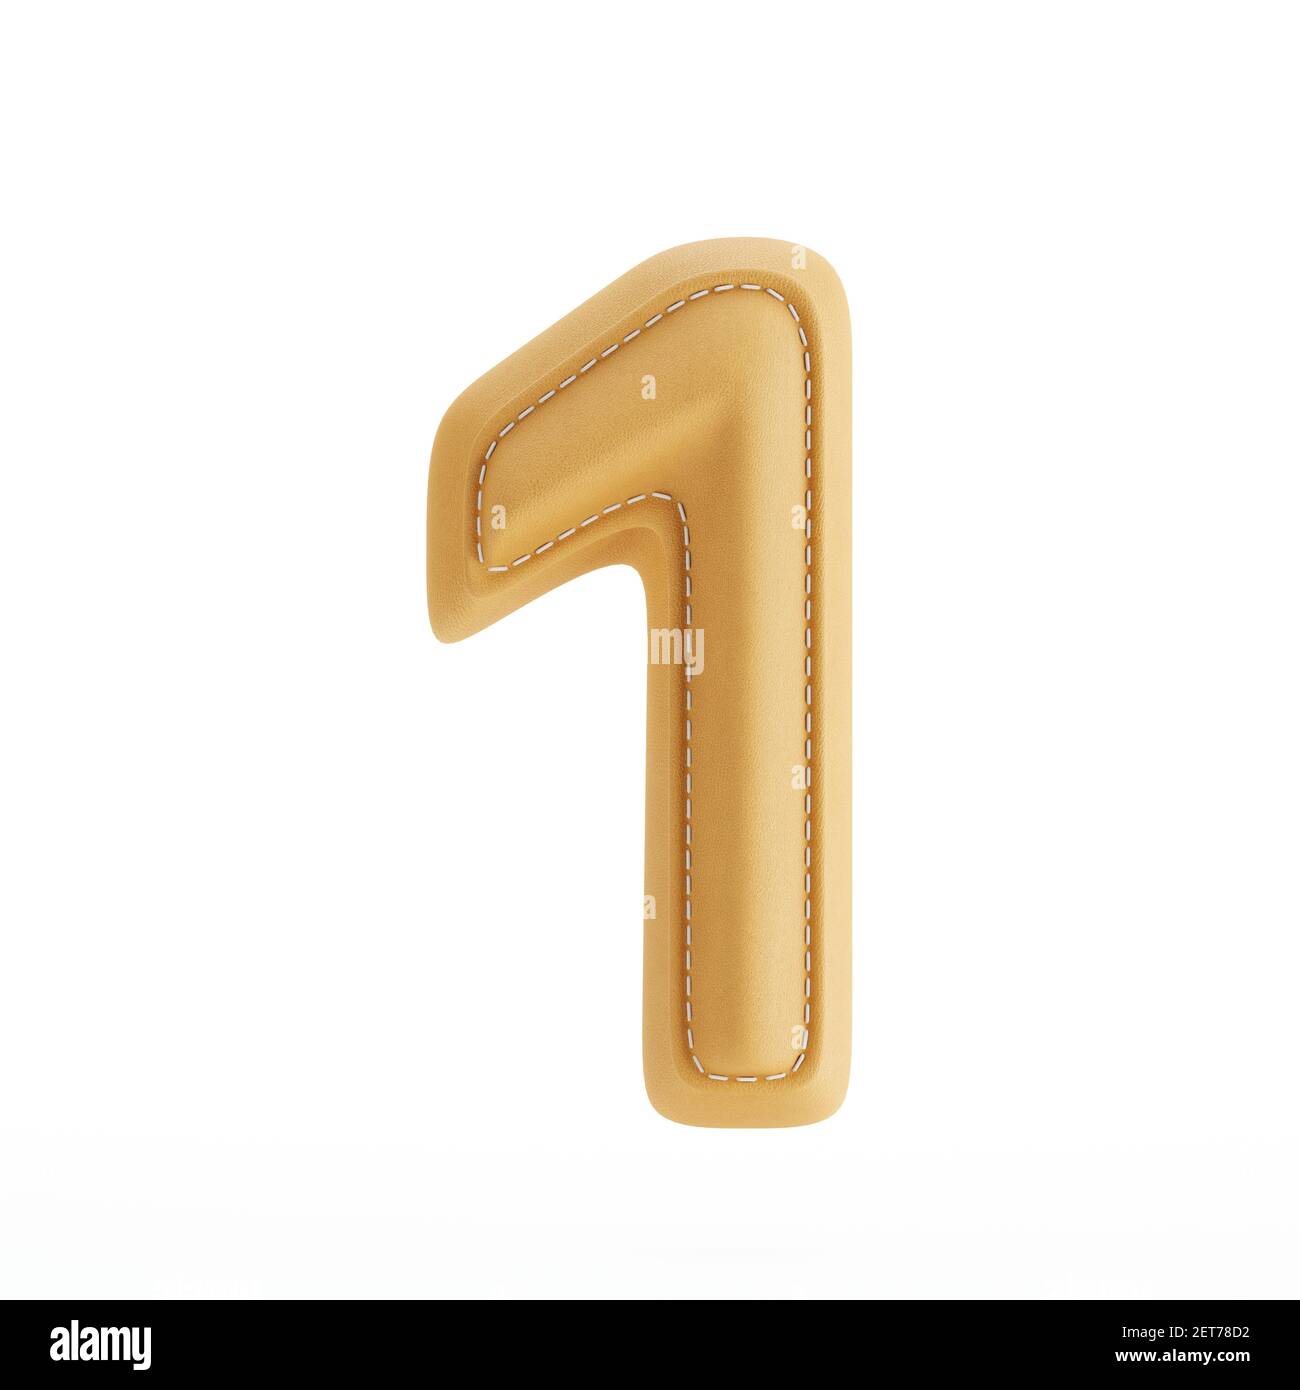 Digit number alphabet yellow leather skin texture letter one 1. 3d rendering illustration Stock Photo